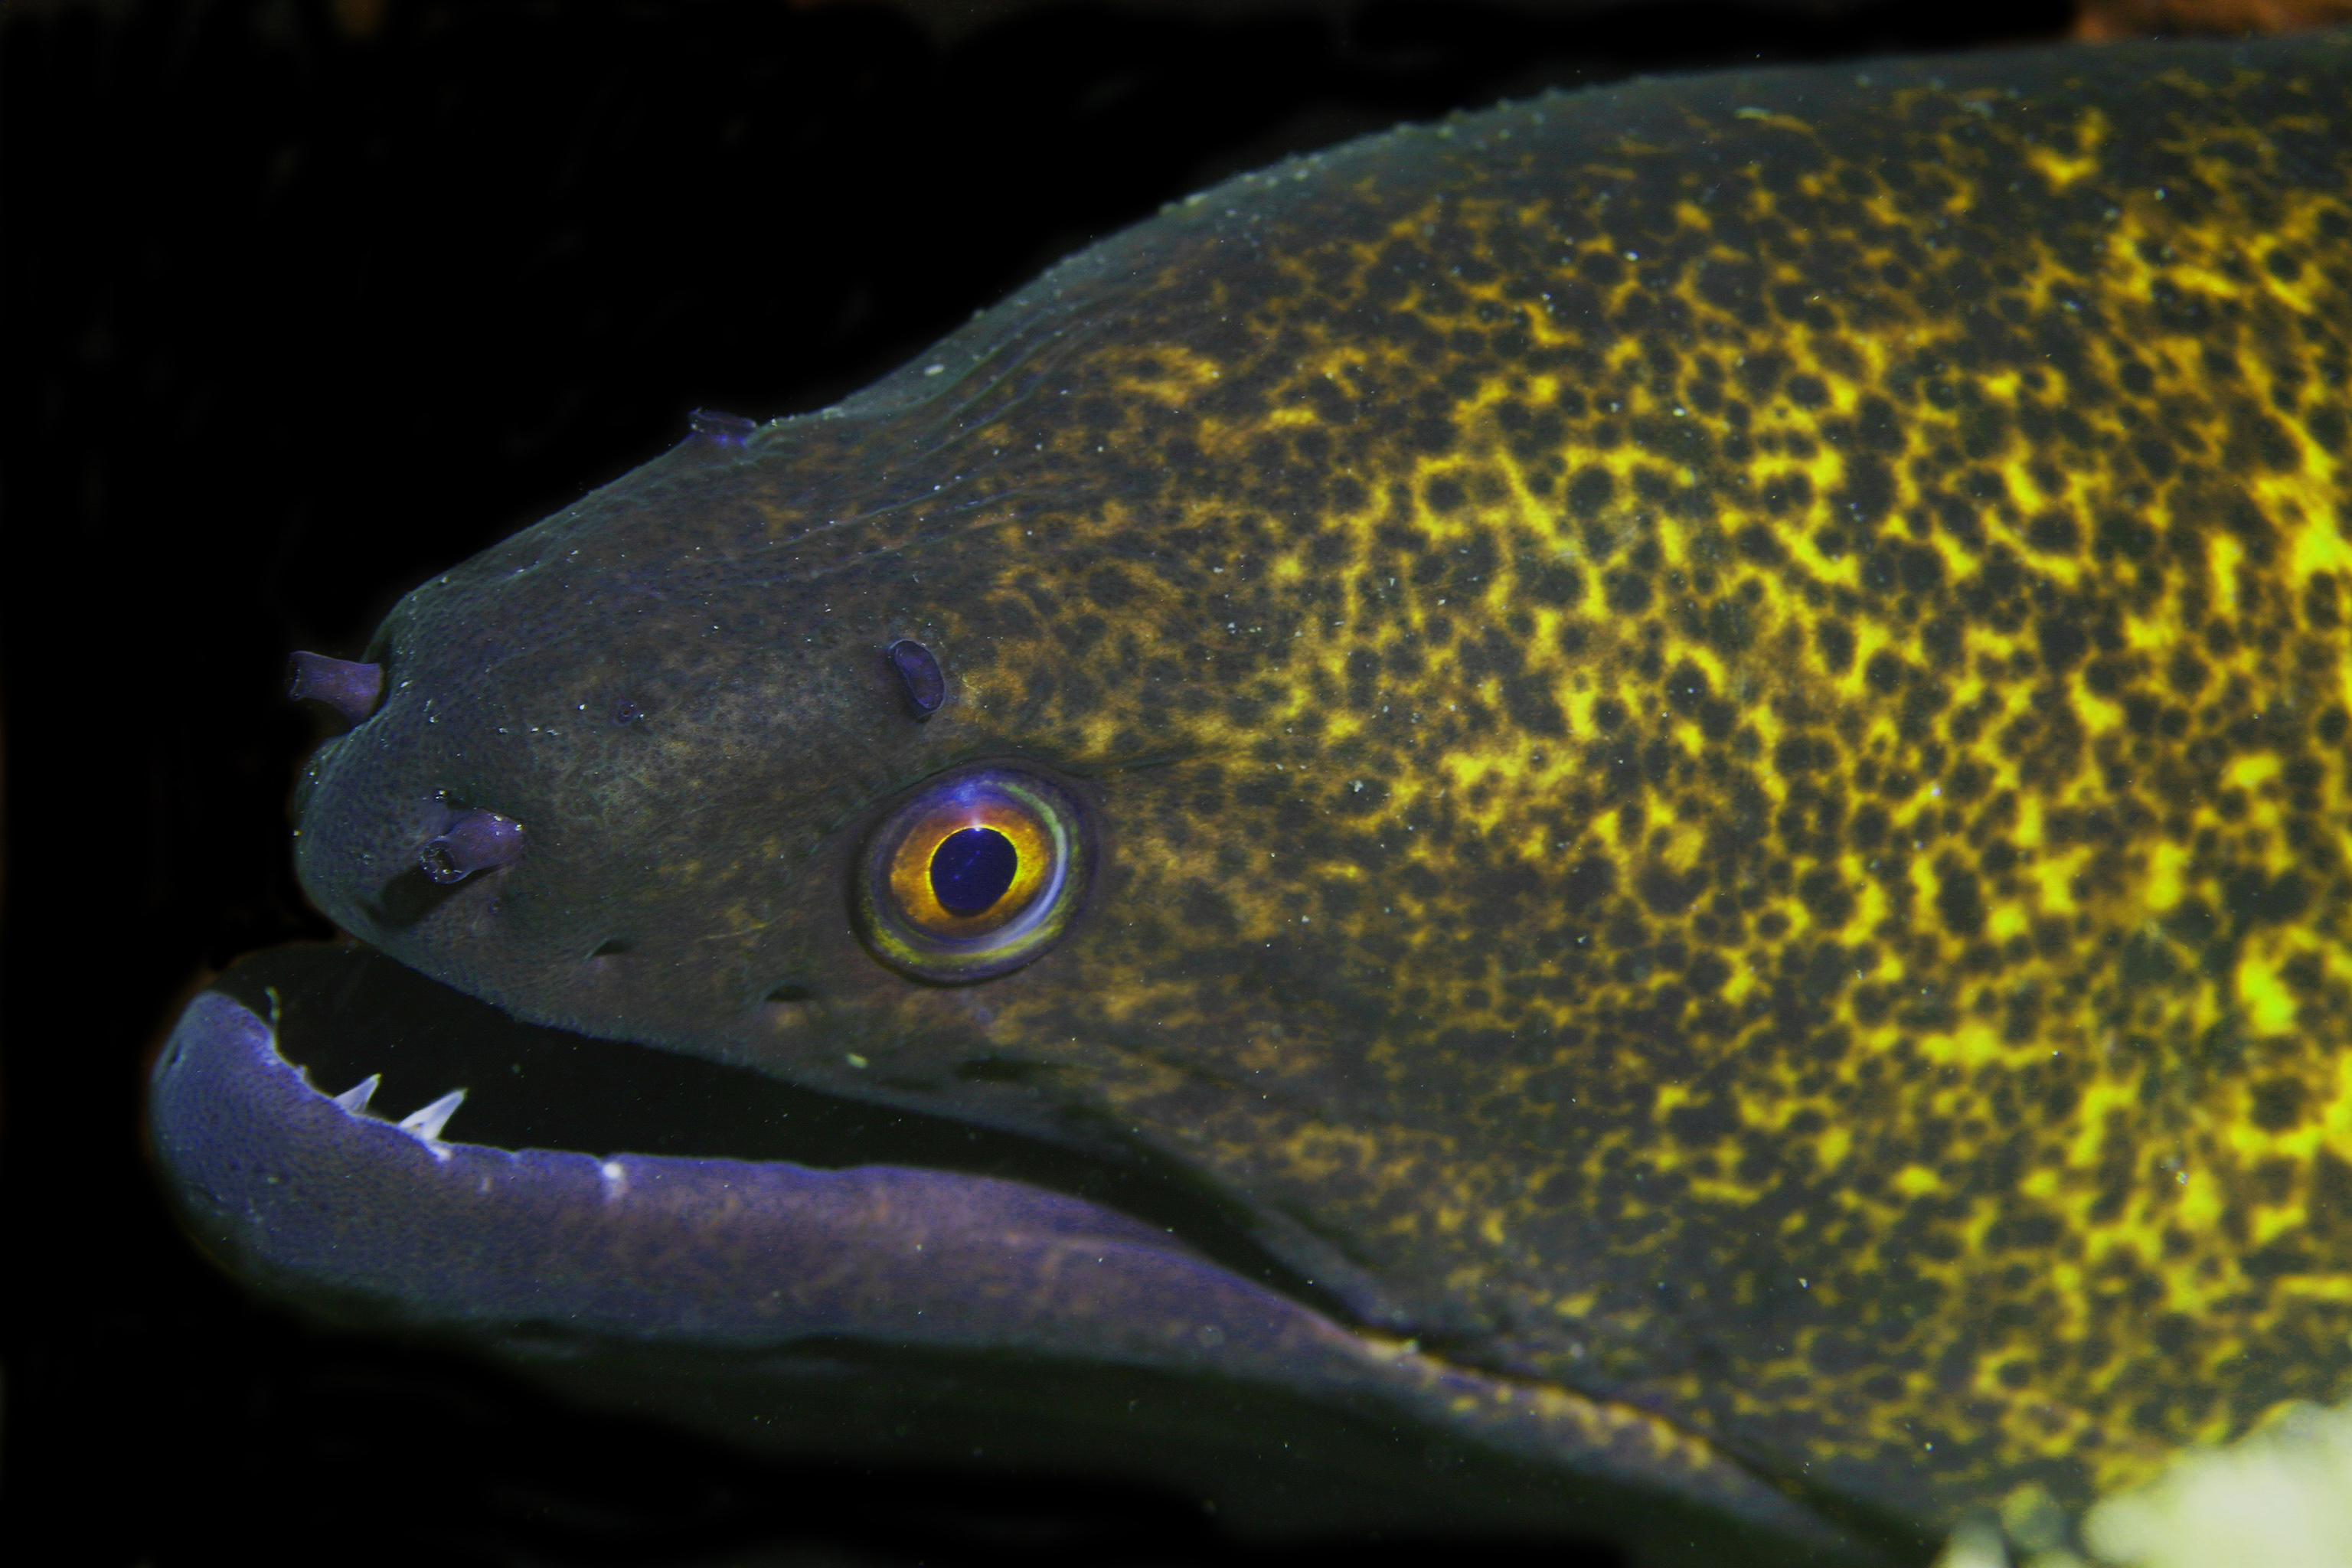 The face of a green and yellow fish.